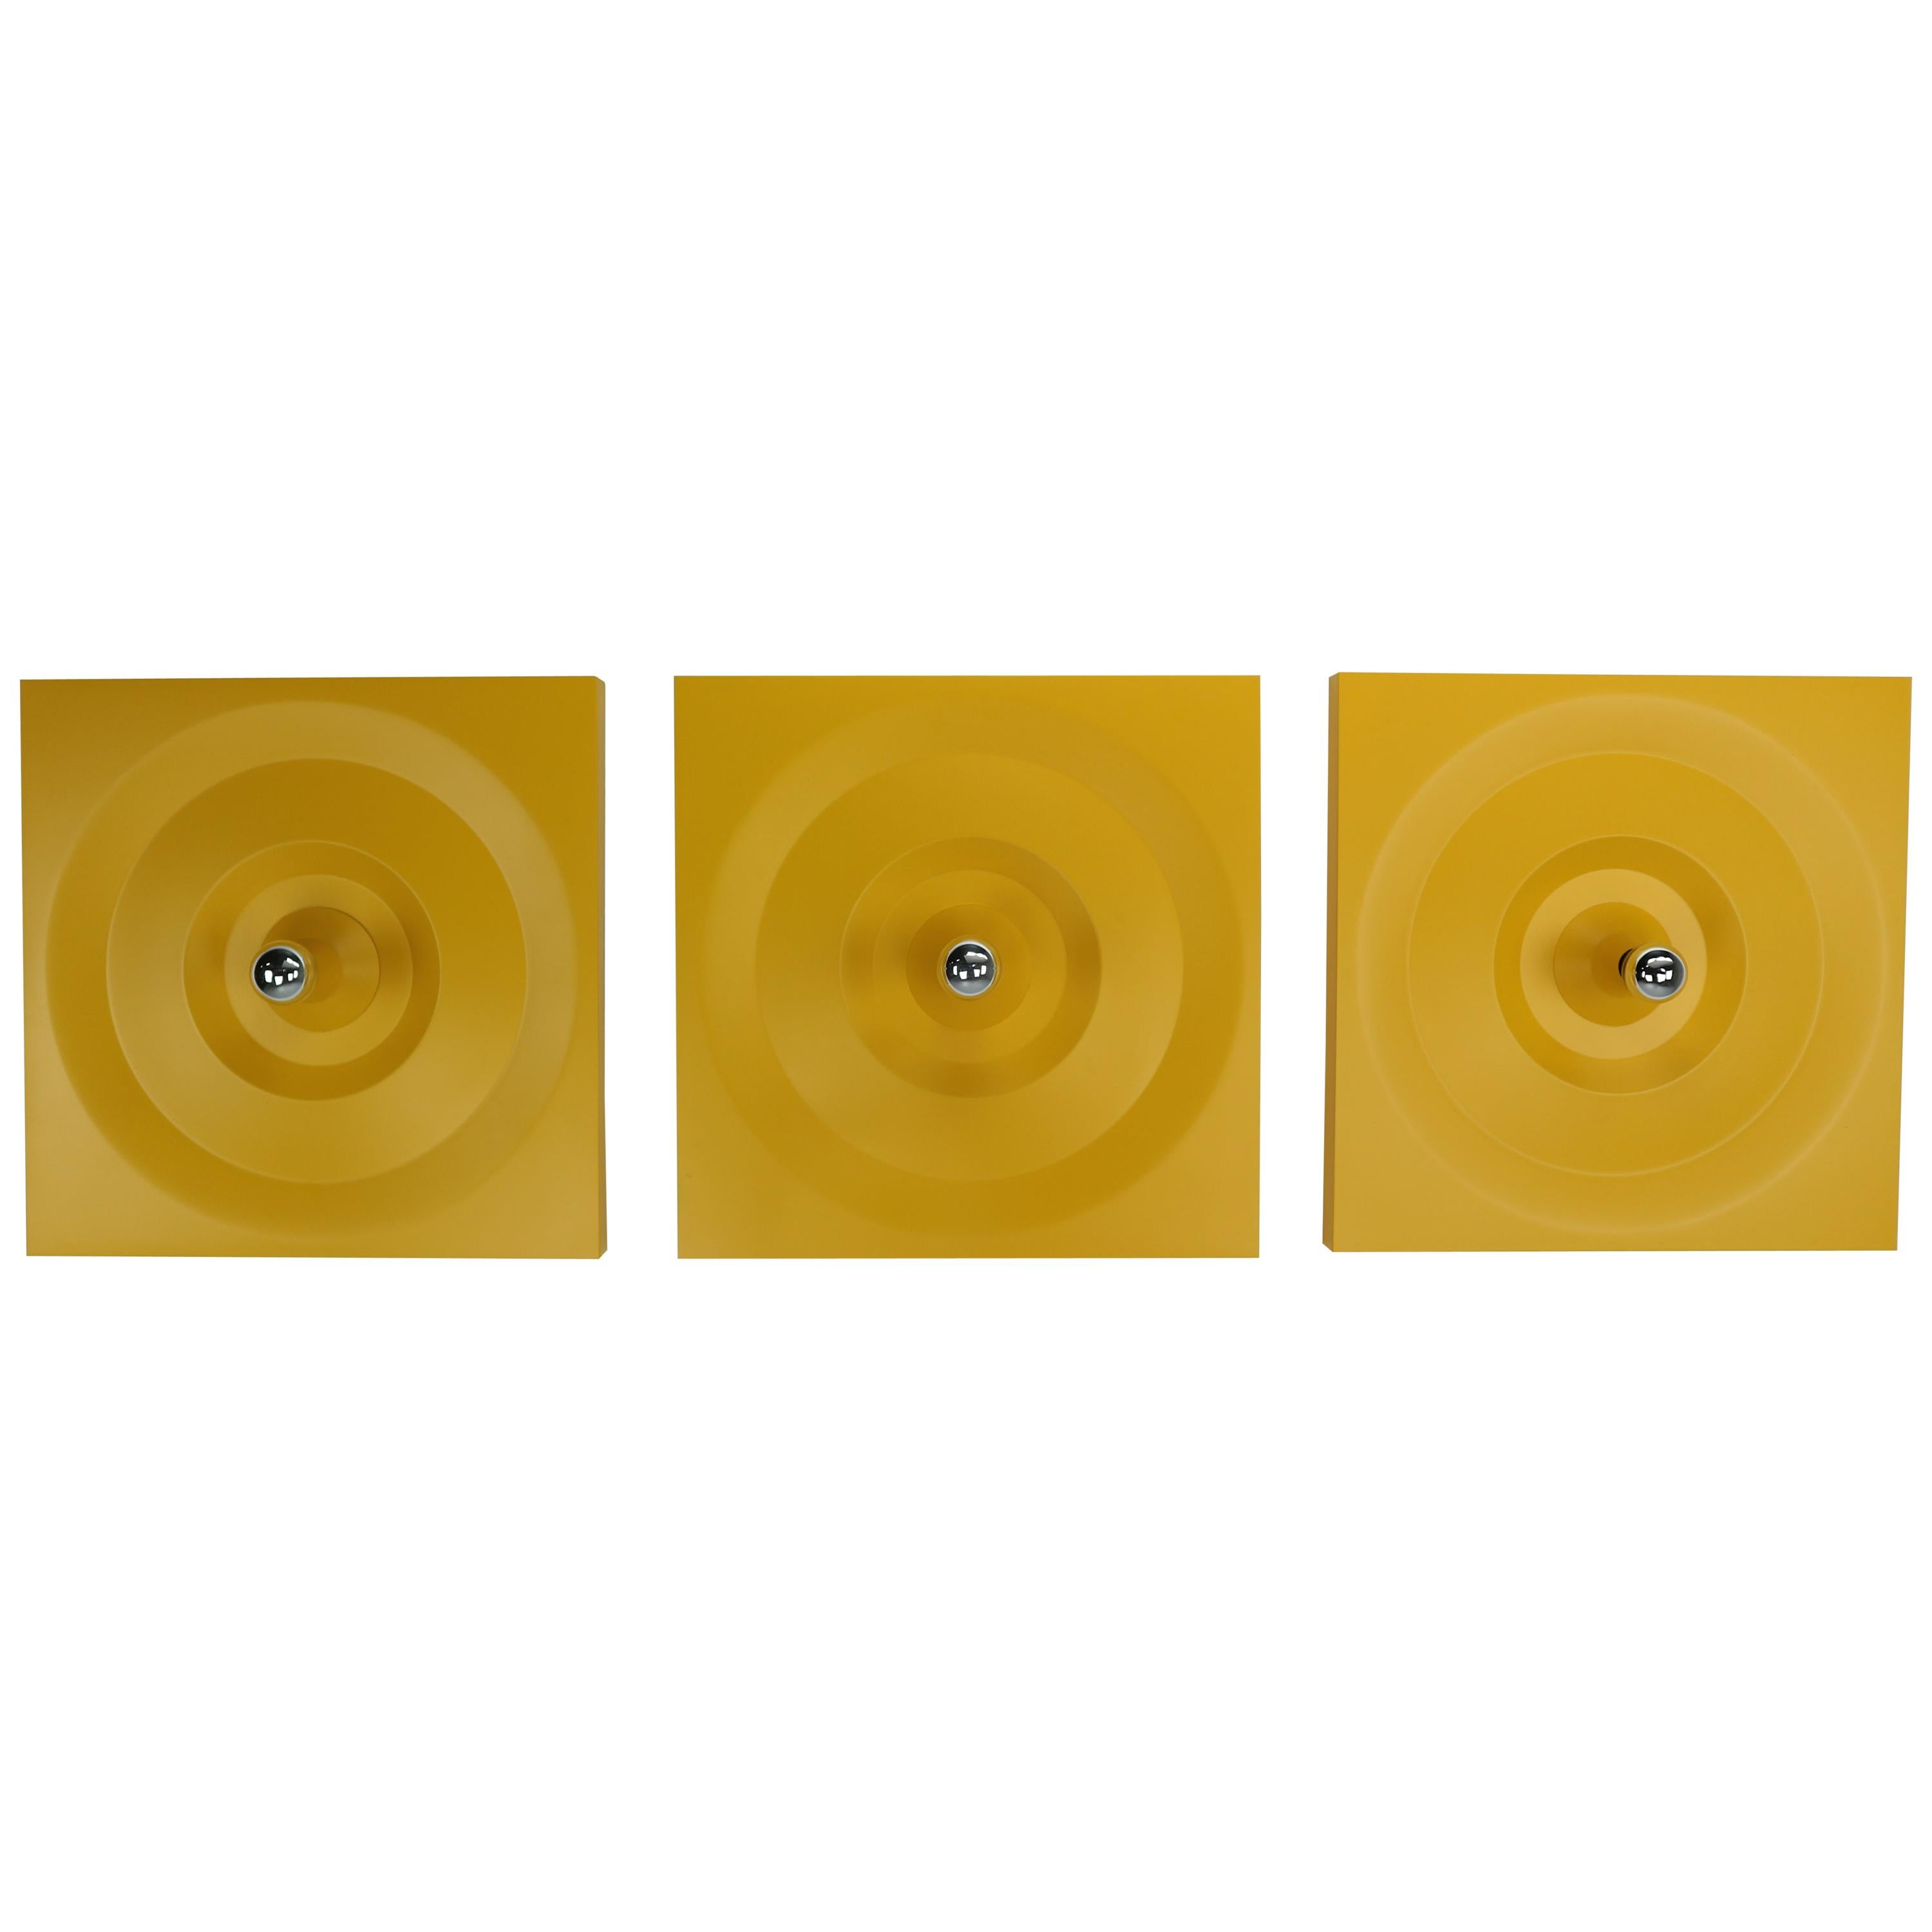 Wall lights designed by Klaus Hempel in the 1970s and produced by Kaiser Leuchten in Germany in the same decade.
This large pieces is made of solid metal and remains with one socket for a bulb in the middle.
Strong yellow tone.
The wall mounting